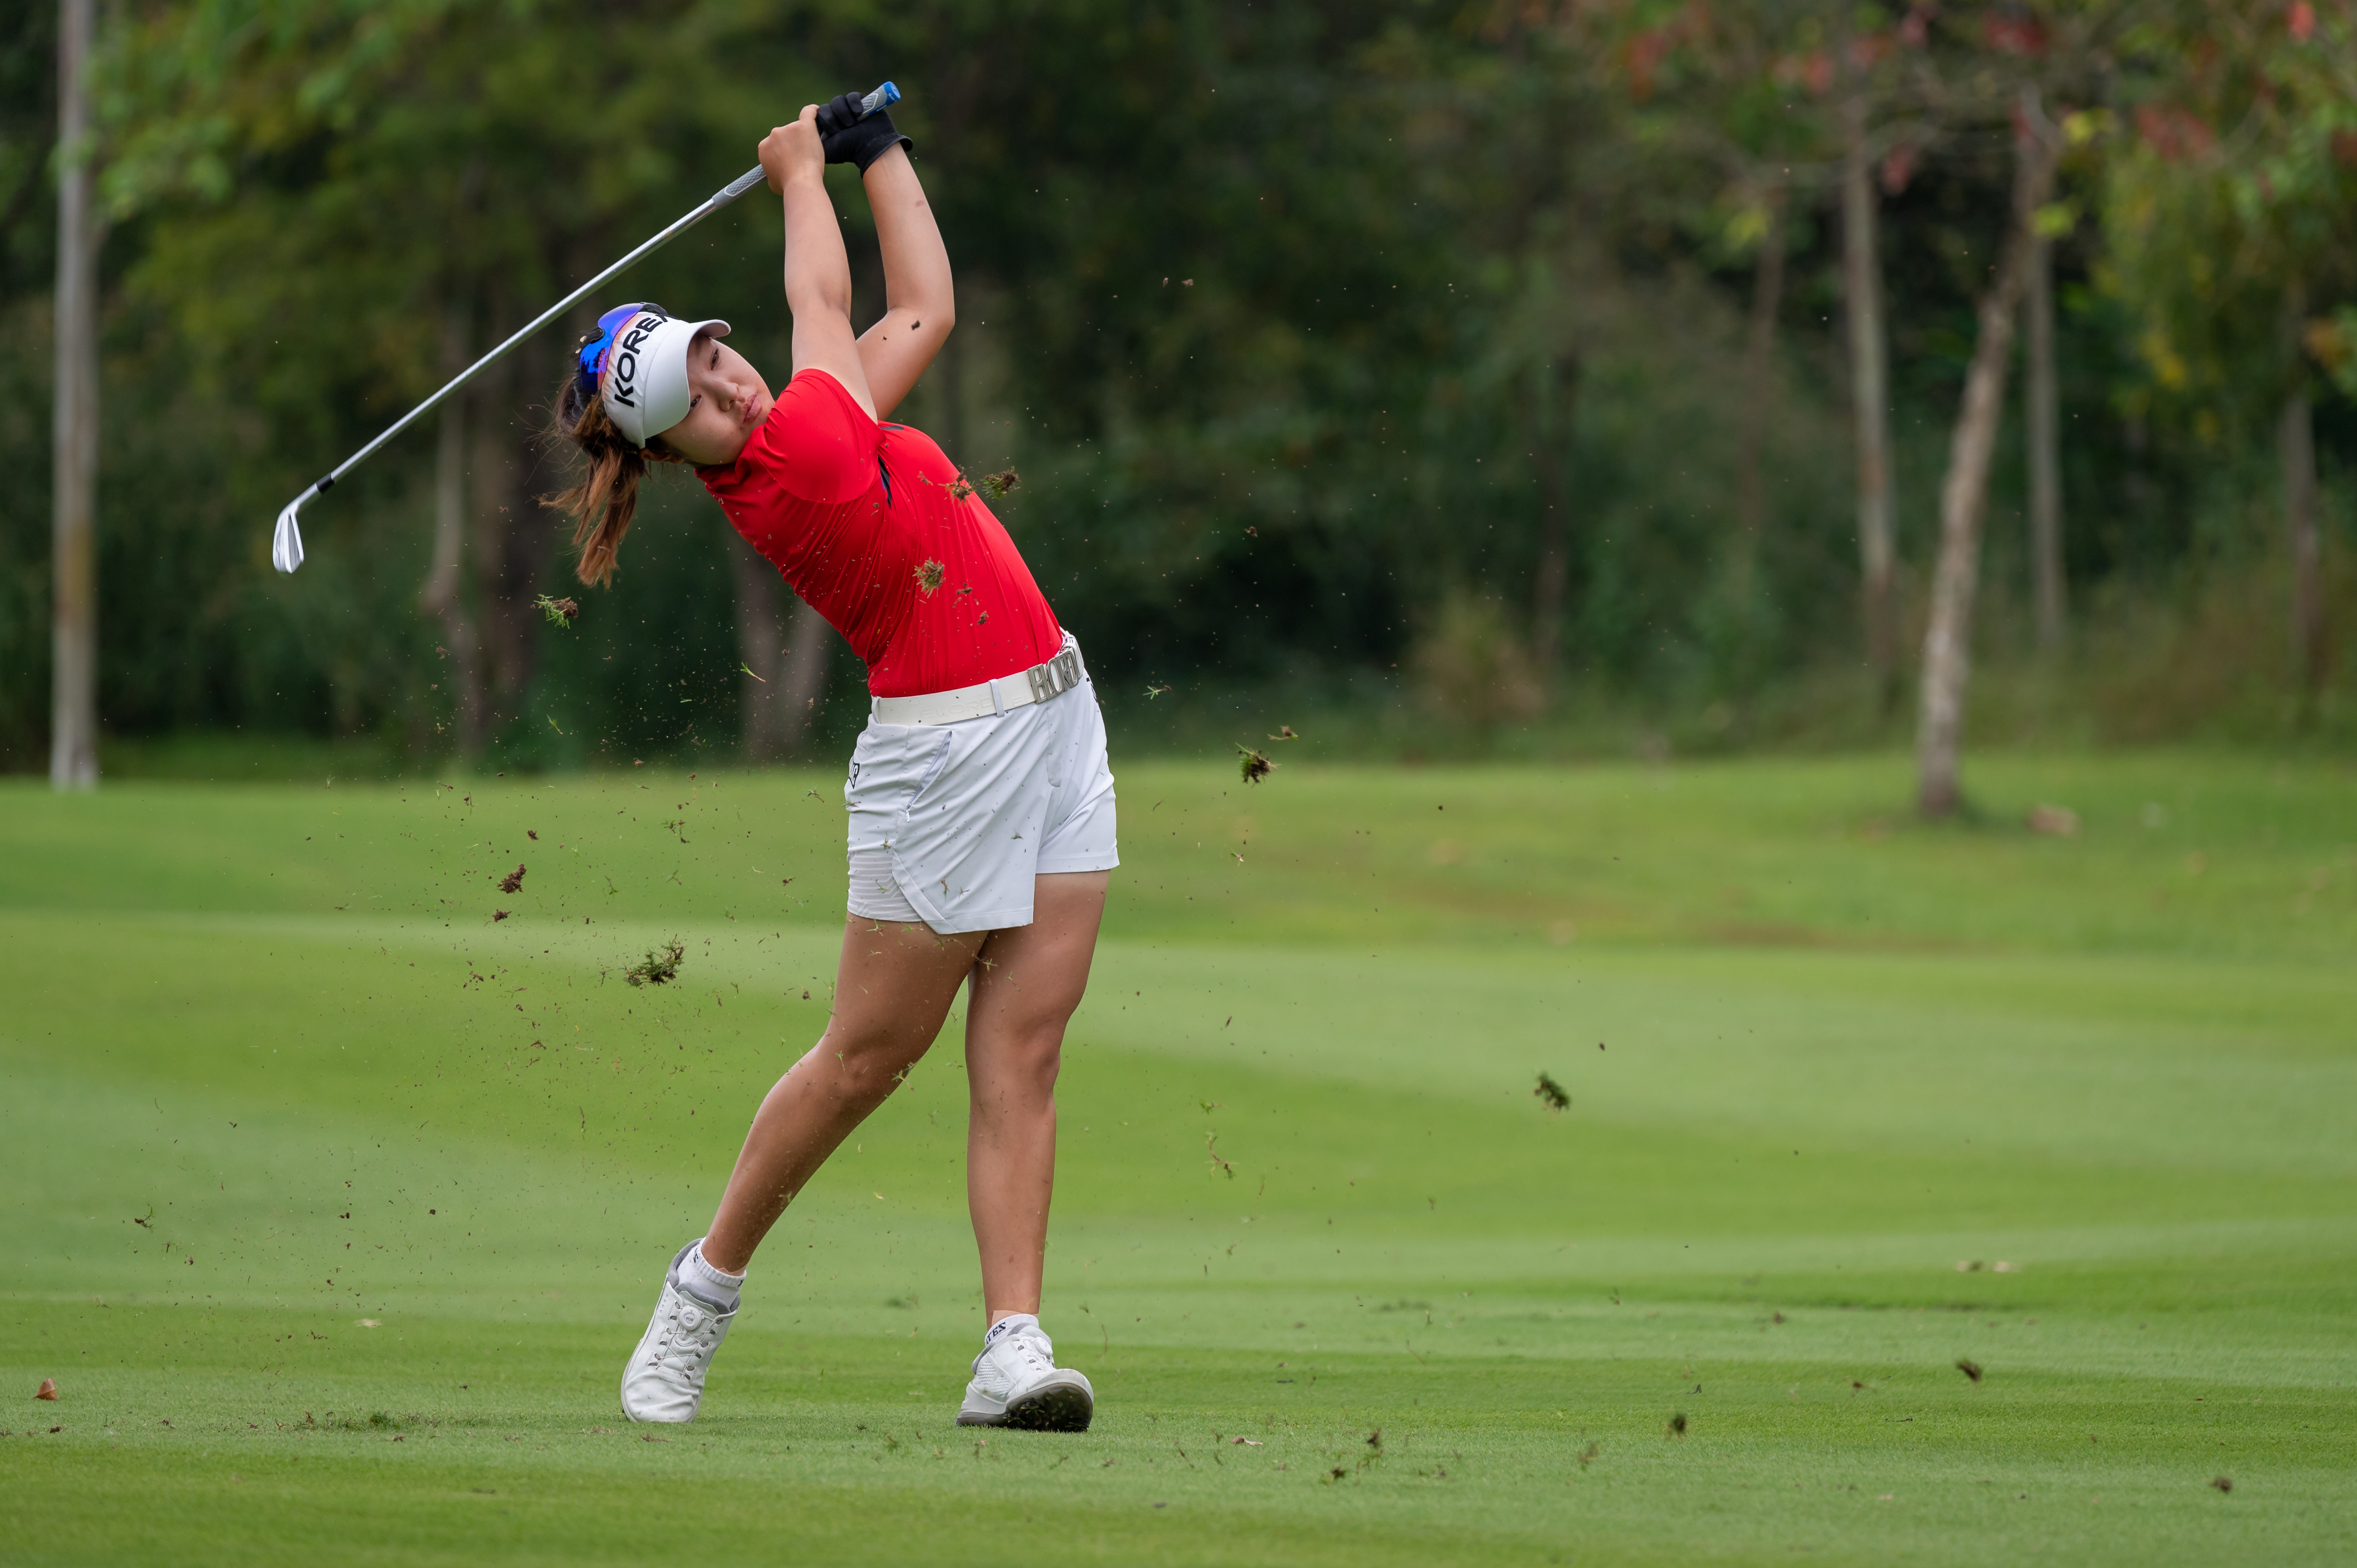 The%20Women's%20Amateur%20Asia-Pacific%20Championship%20-%20Day%20Three%20(1)